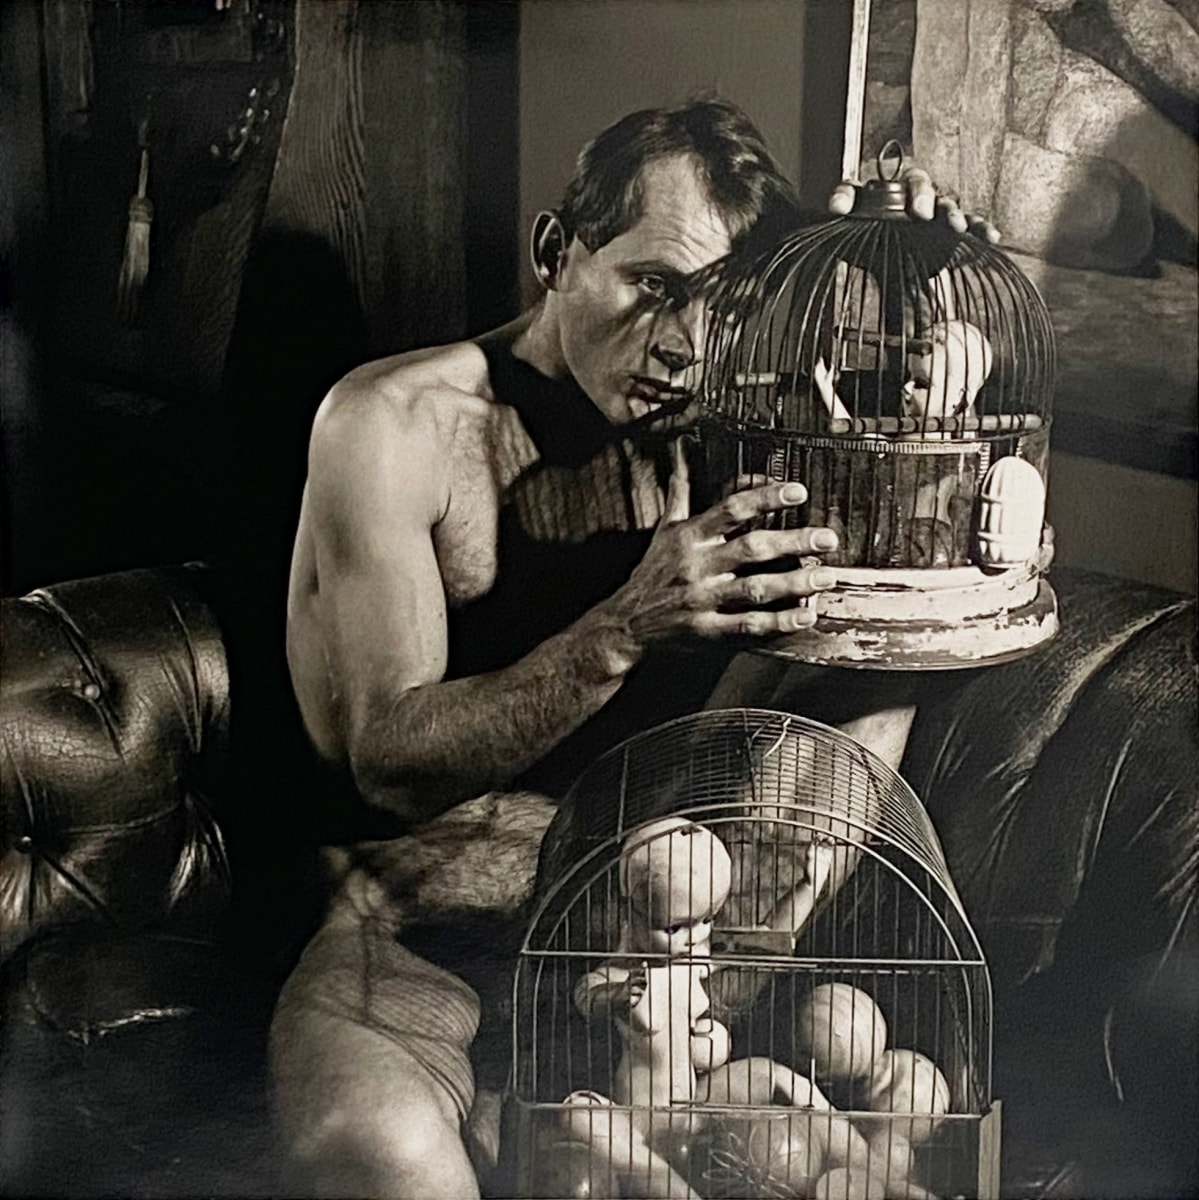 Robert Giard, Man With Caged Dolls, 1978